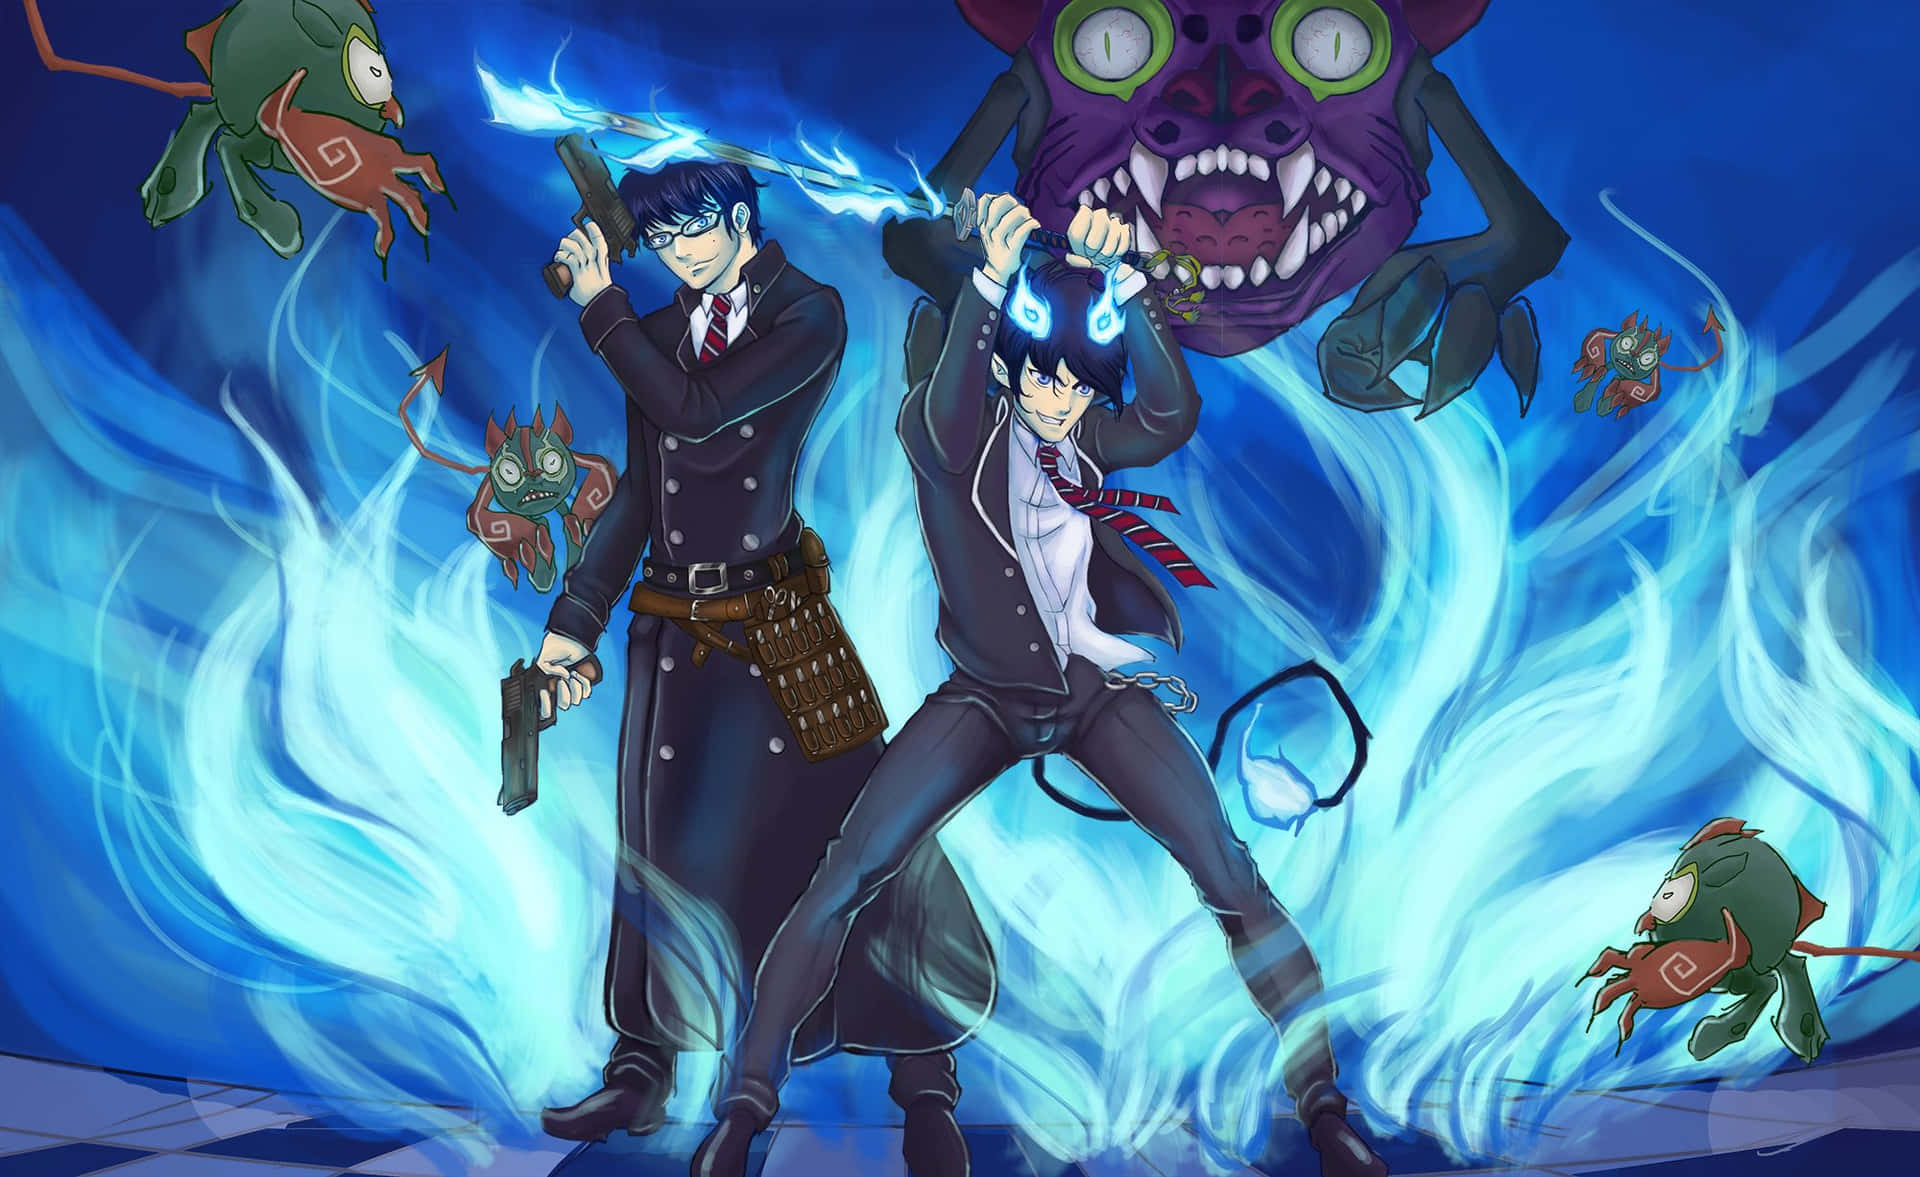 Releasing the power of Blue Exorcist